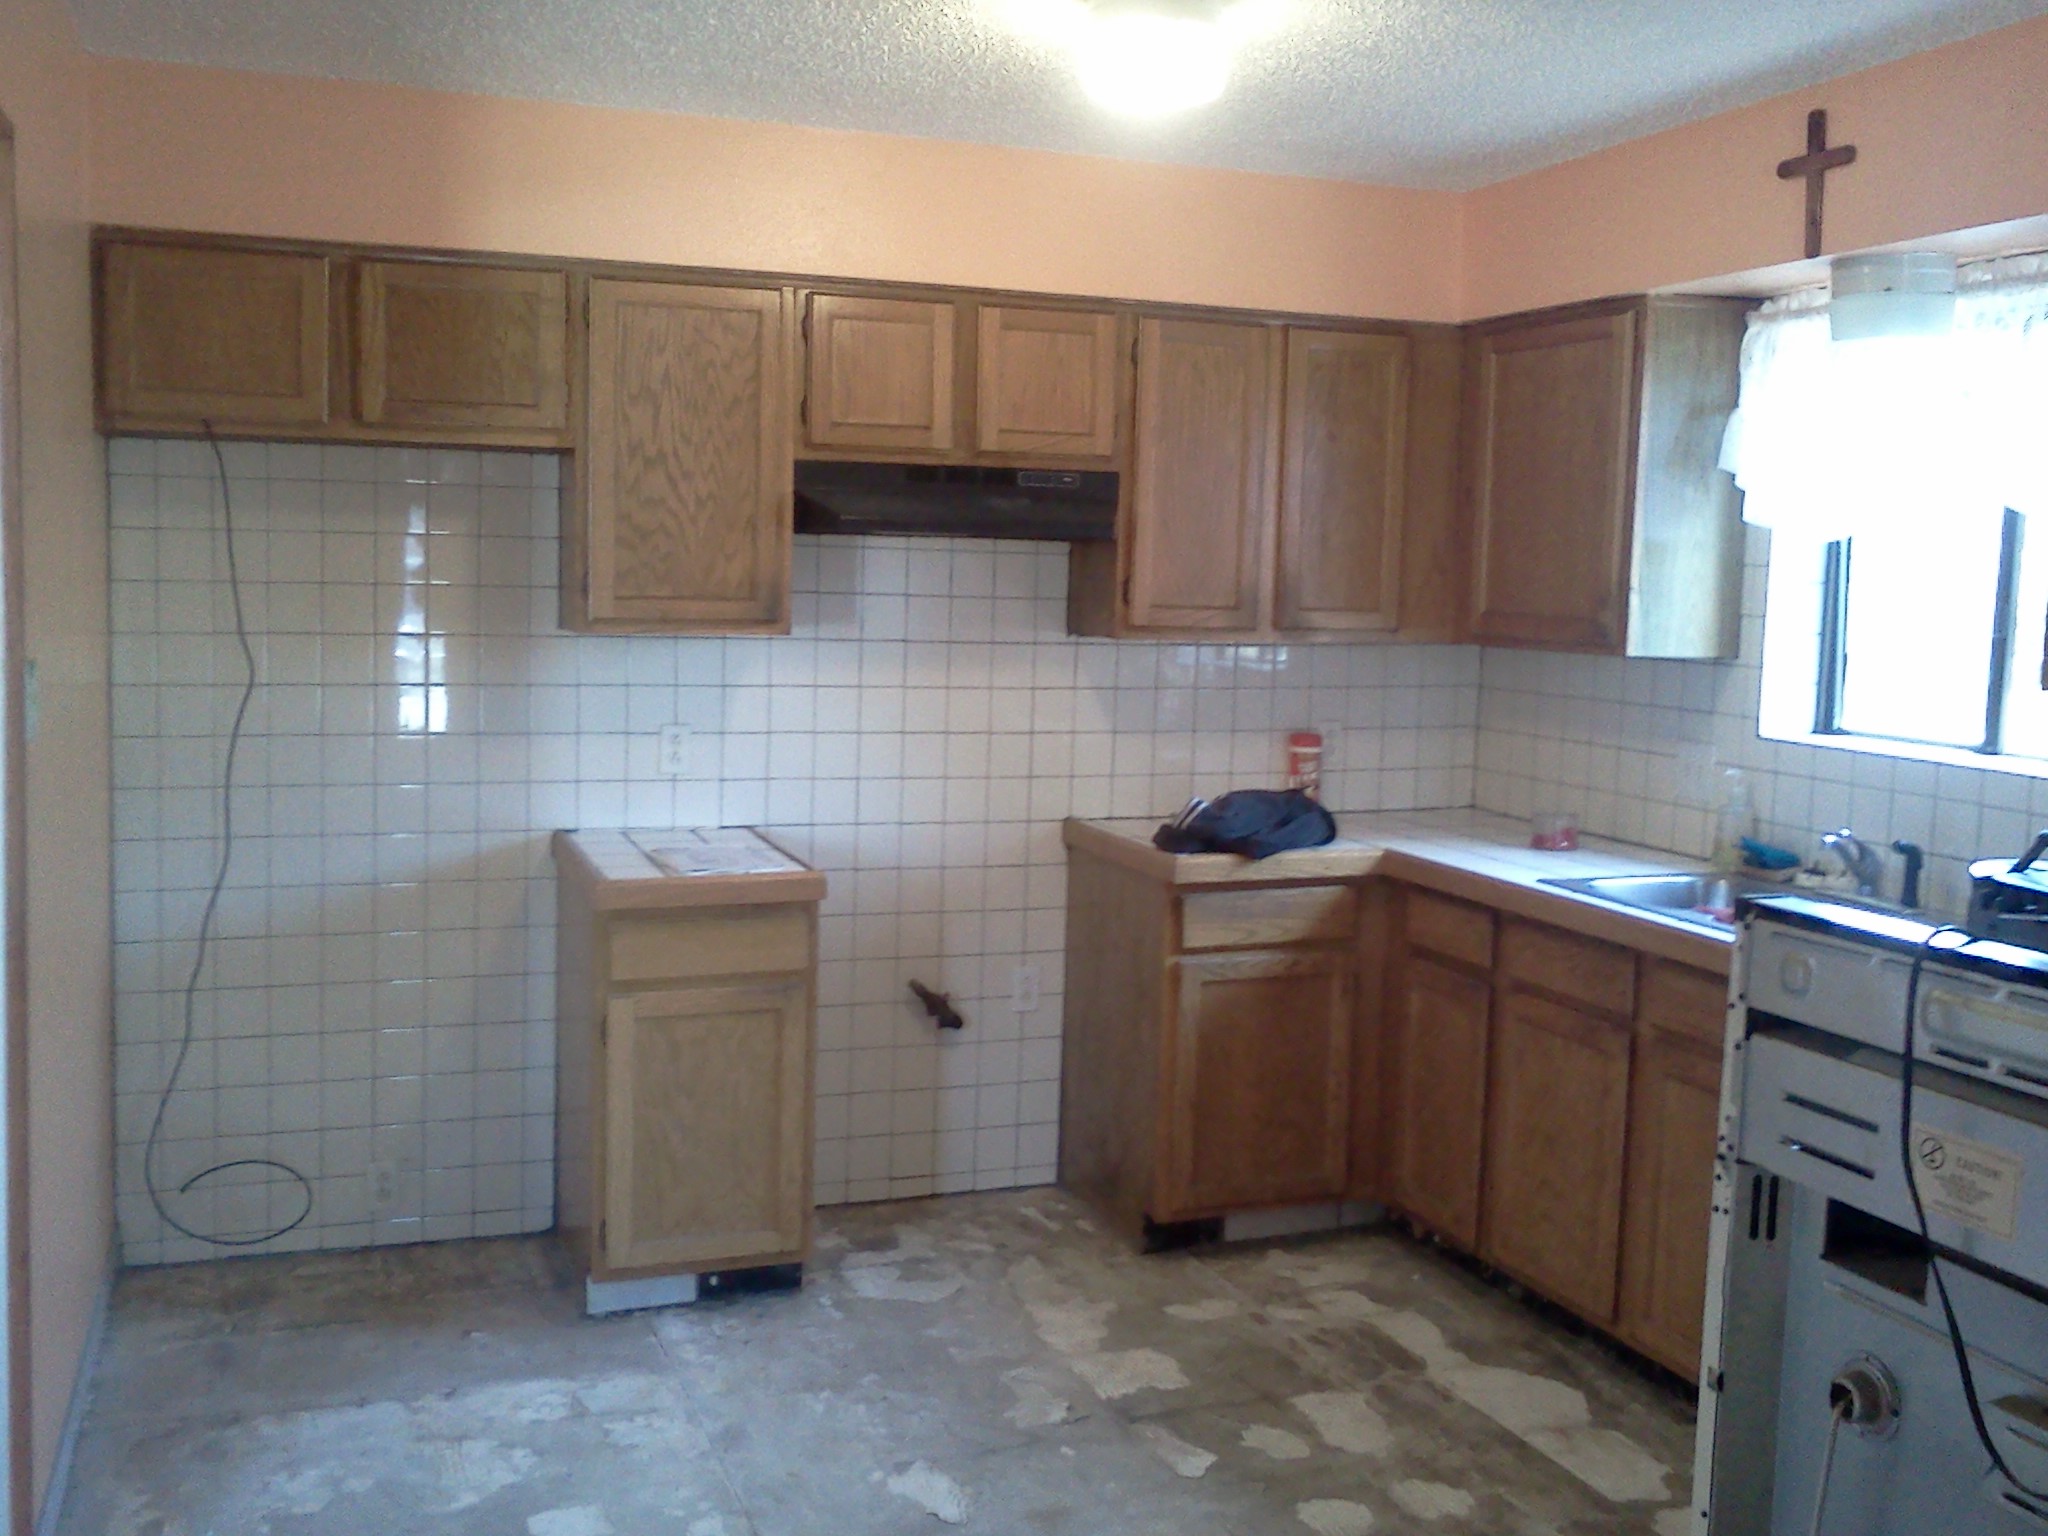 Image showing kitchen before remodel